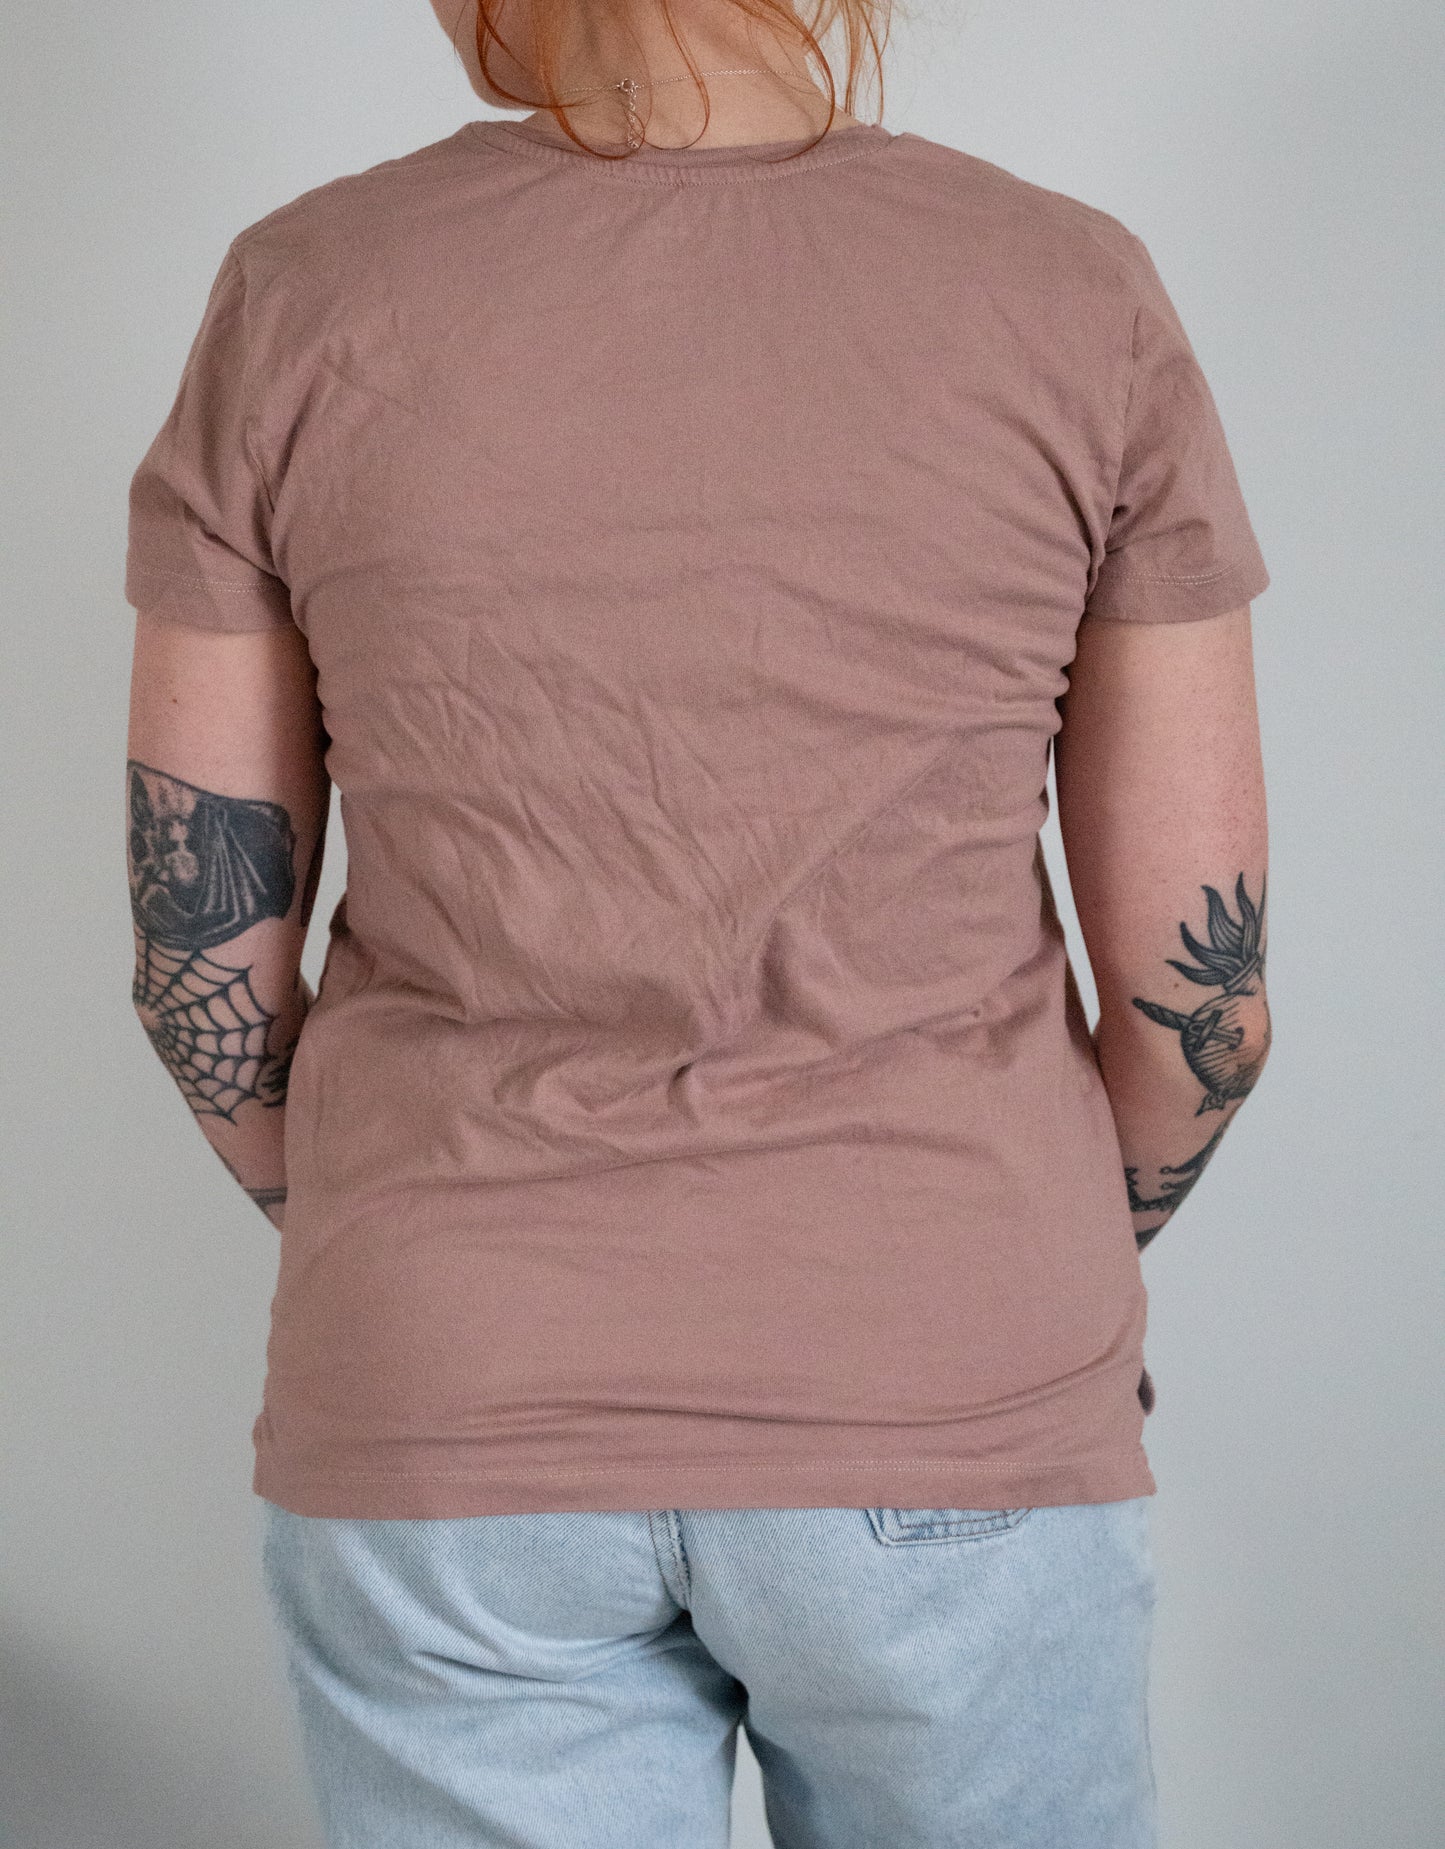 "Very Much In Love" Baby Pink Bench Tee - Size S